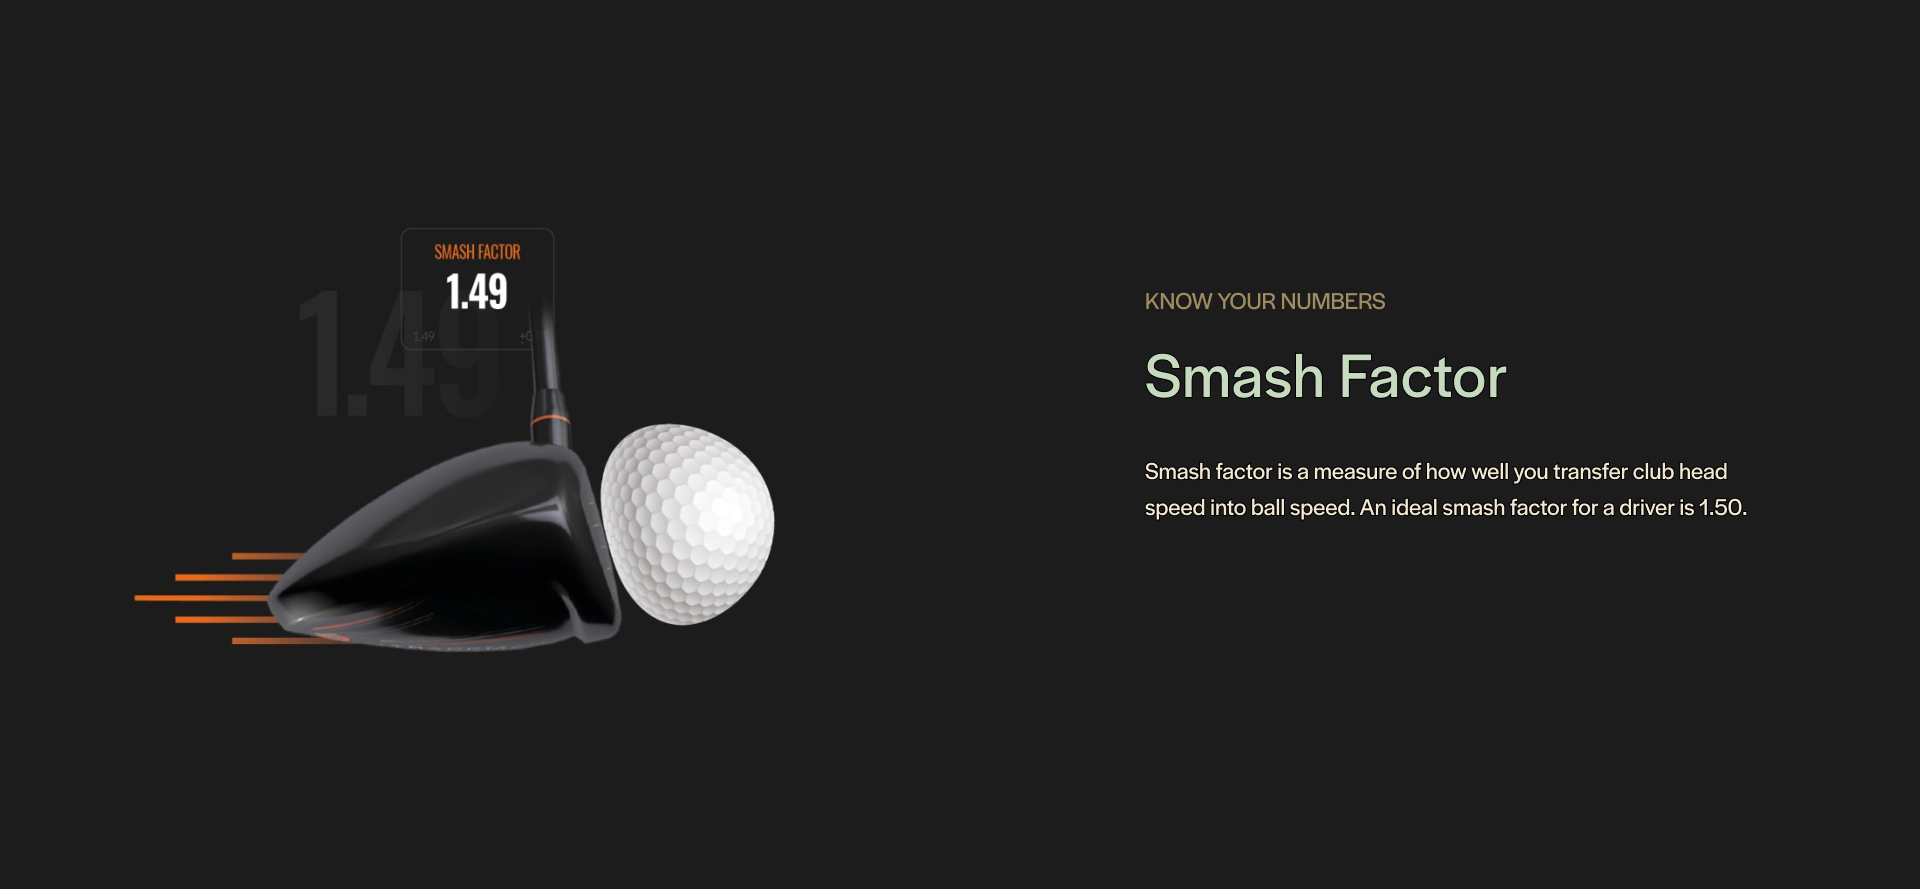 Smash factor is a measure of how well you transfer club head speed into ball speed. An ideal smash factor for a driver is 1.50.